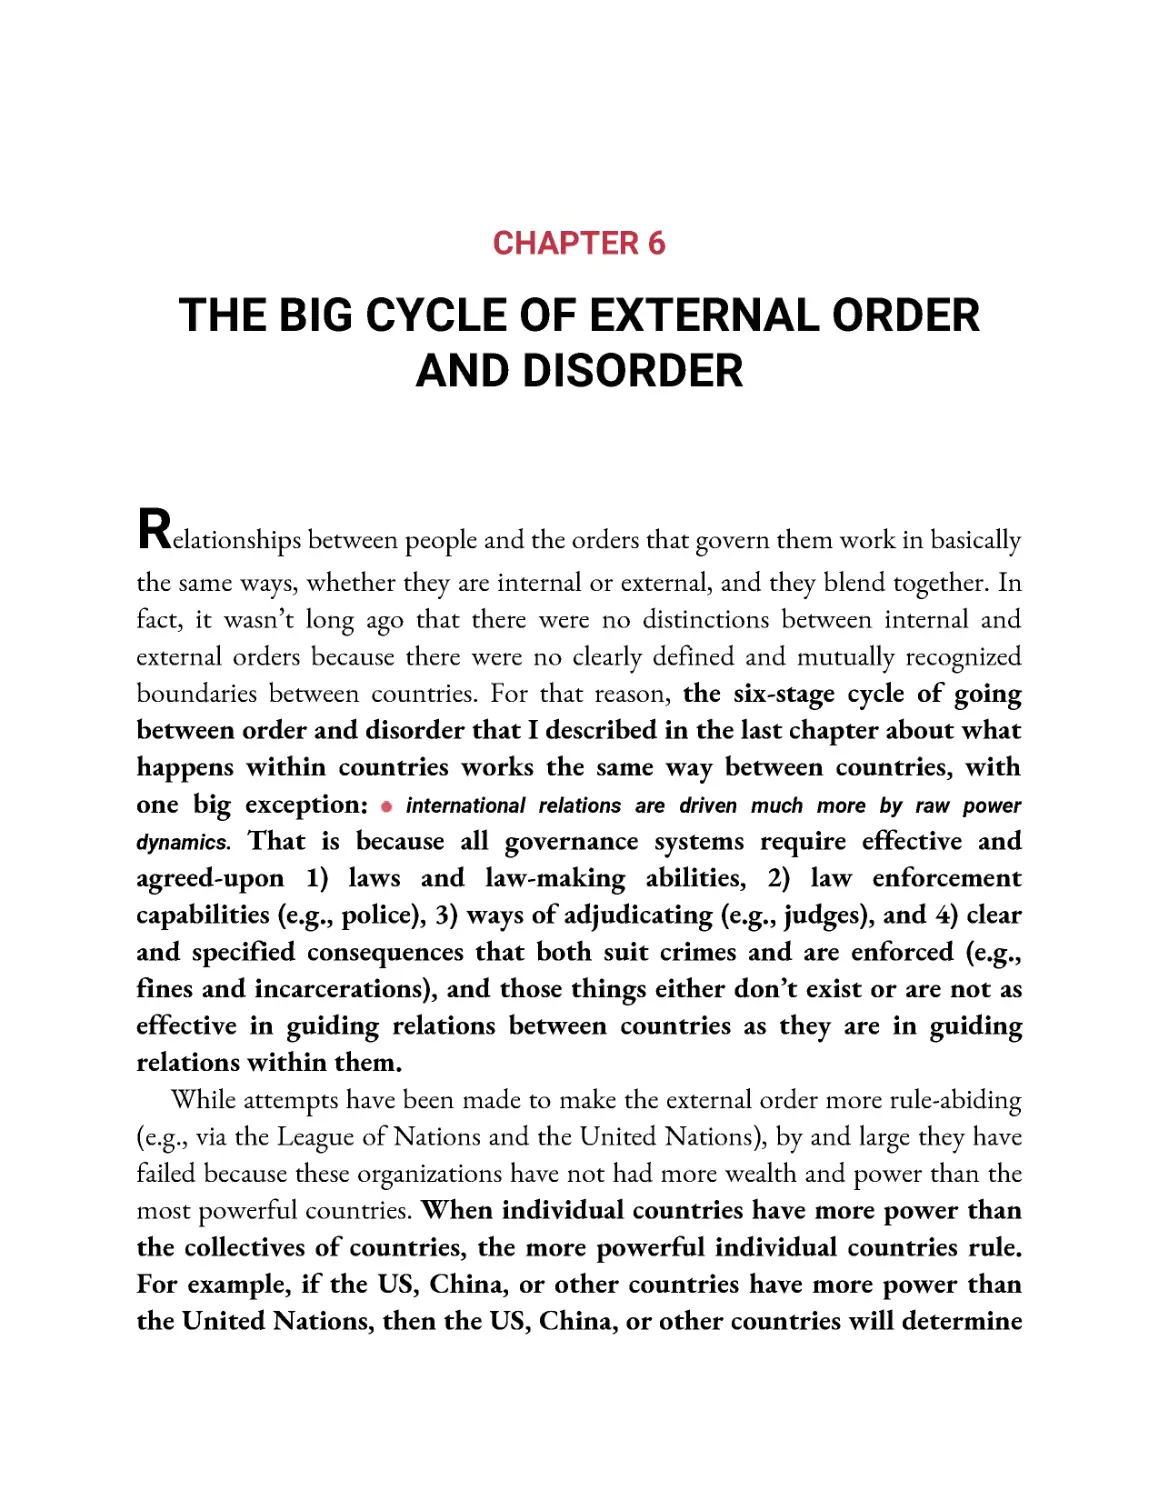 ﻿Chapter 6: The Big Cycle of External Order and Disorde